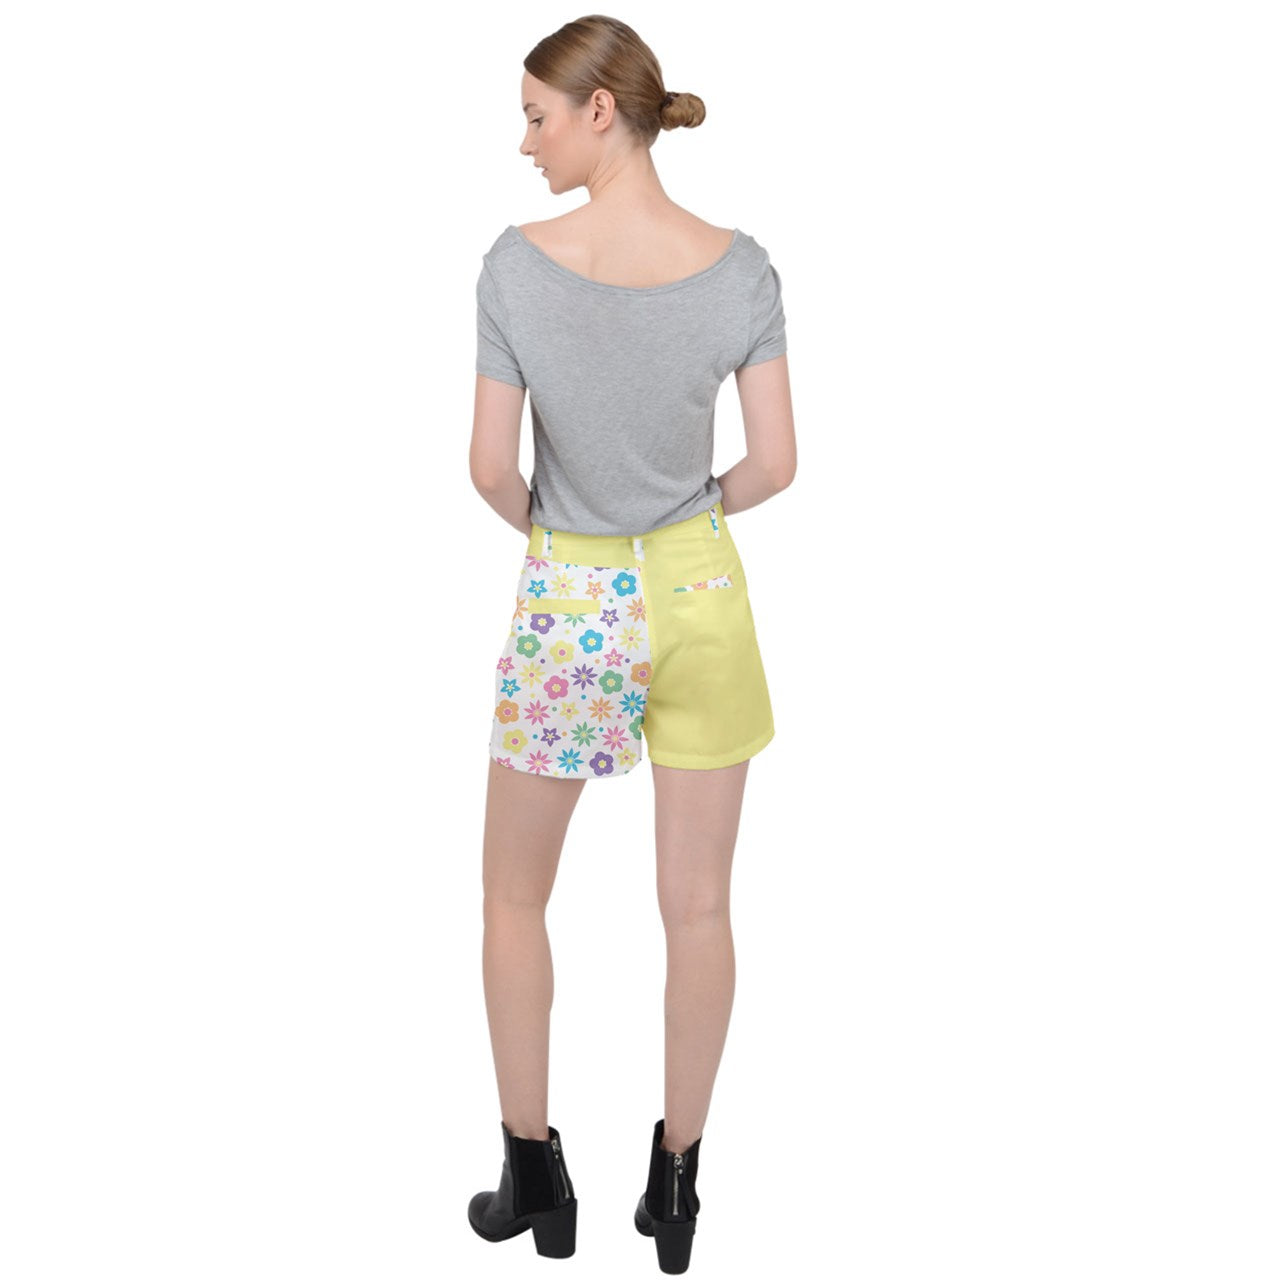 Retro Flowers Ripstop Shorts - White with Yellow Accents